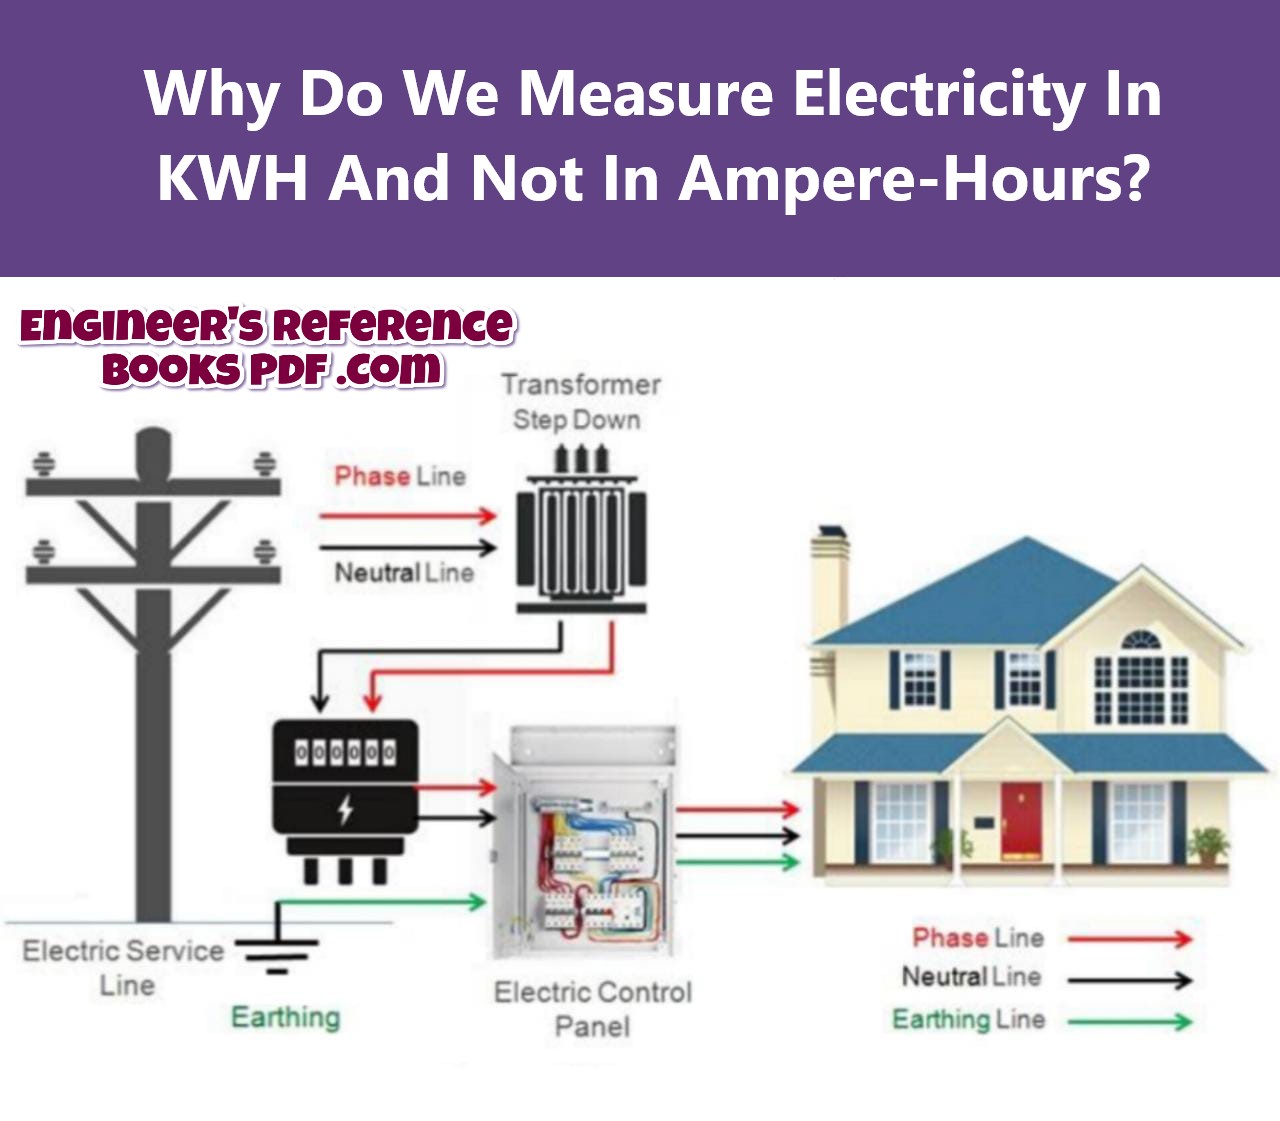 Why Do We Measure Electricity In KWH And Not In Ampere-Hours?
